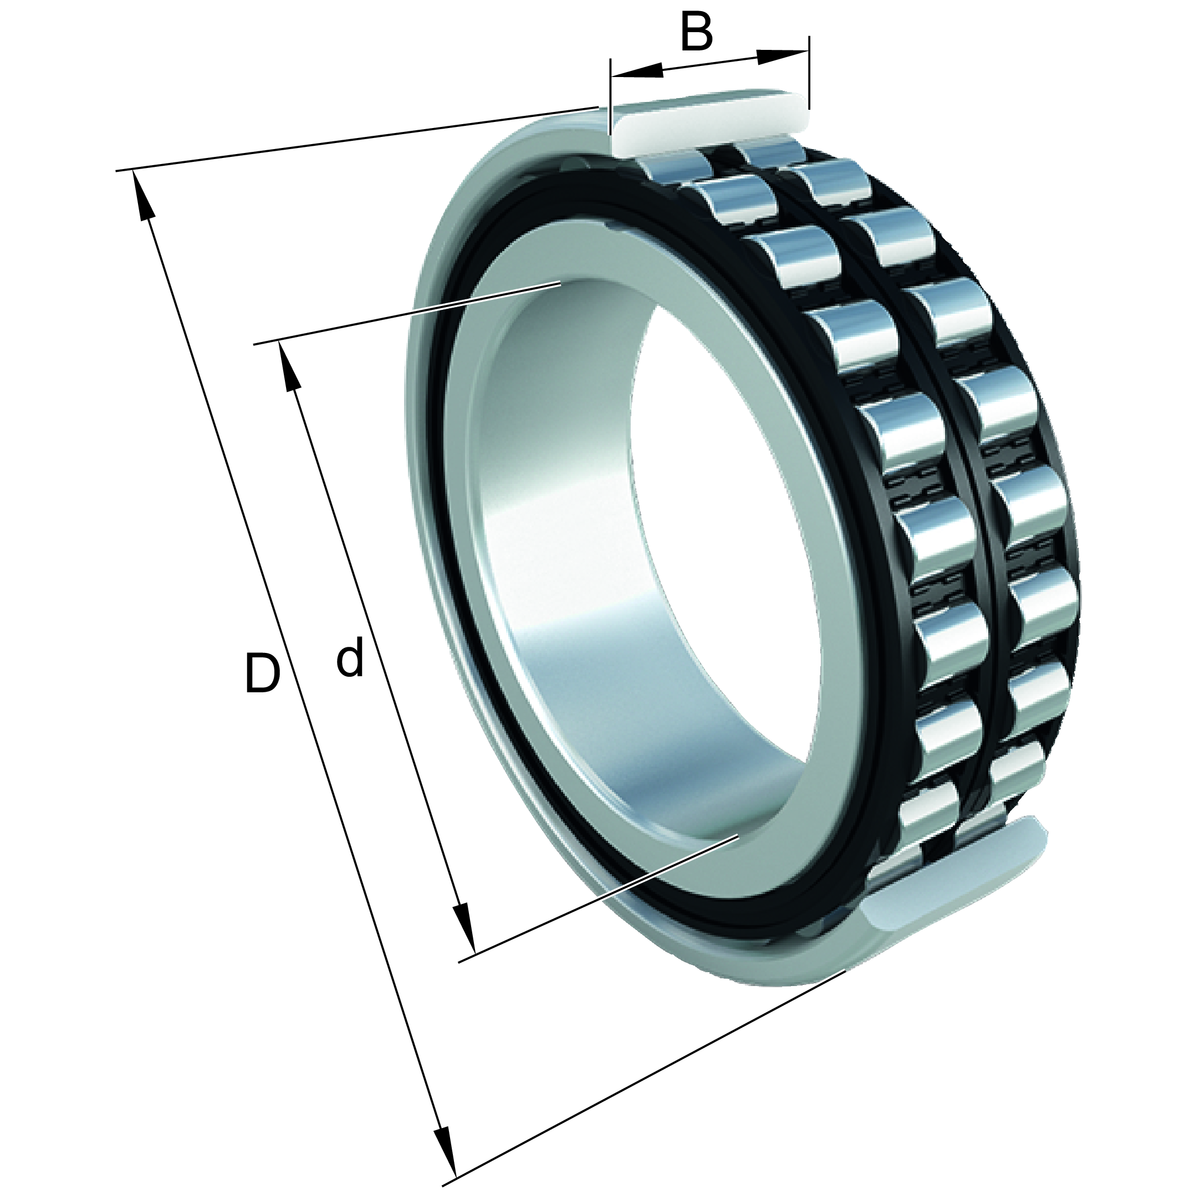 Cylindrical Roller Bearing NN..-D-TVP-SP-XL, with Cage, Two-Row, Non-Locating Bearing, Type NN